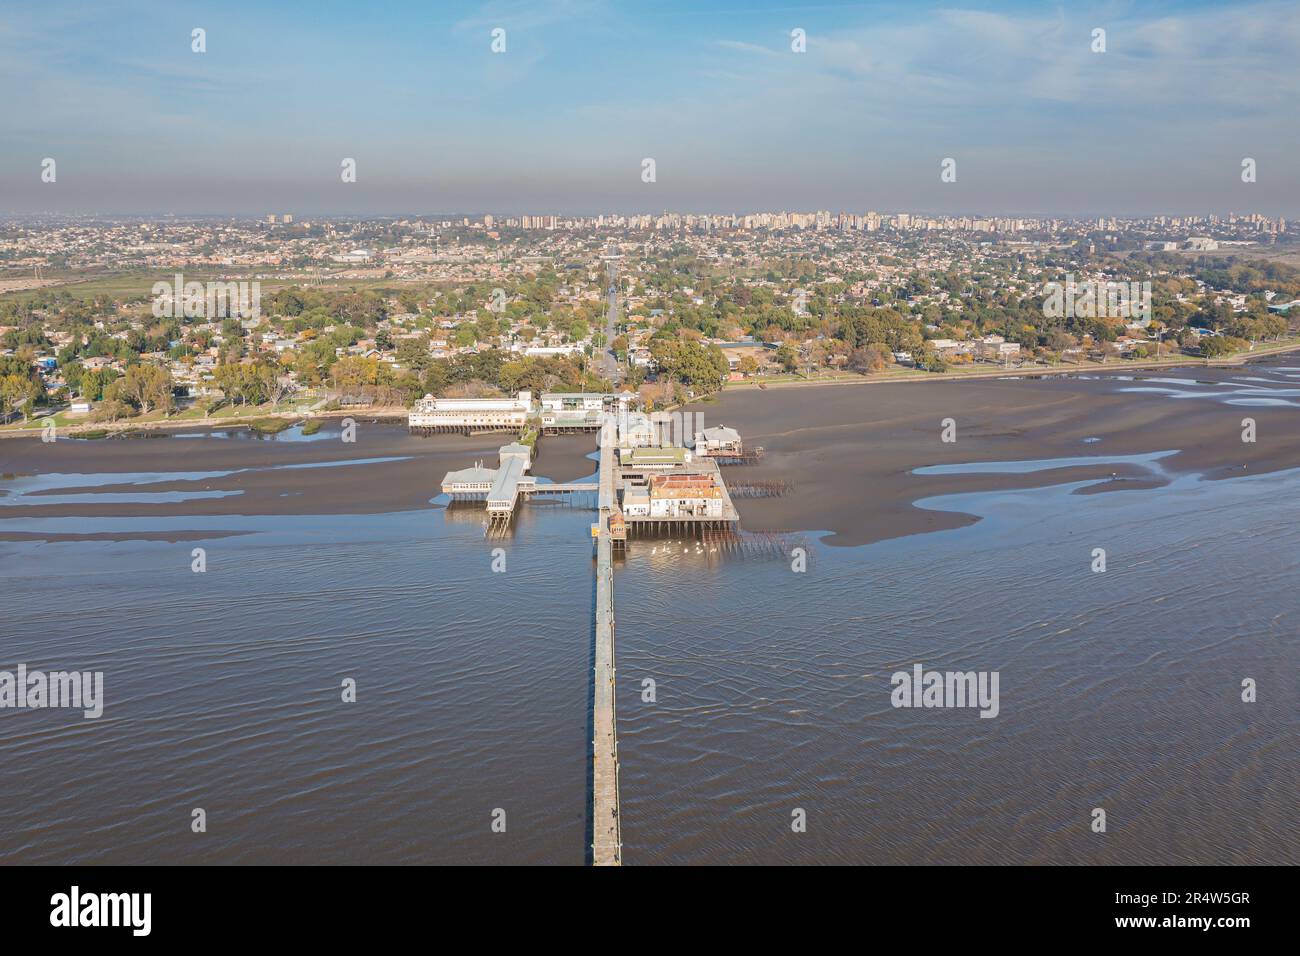 Aerial view of the coast of the Rio de la Plata in the city of Quilmes. Stock Photo